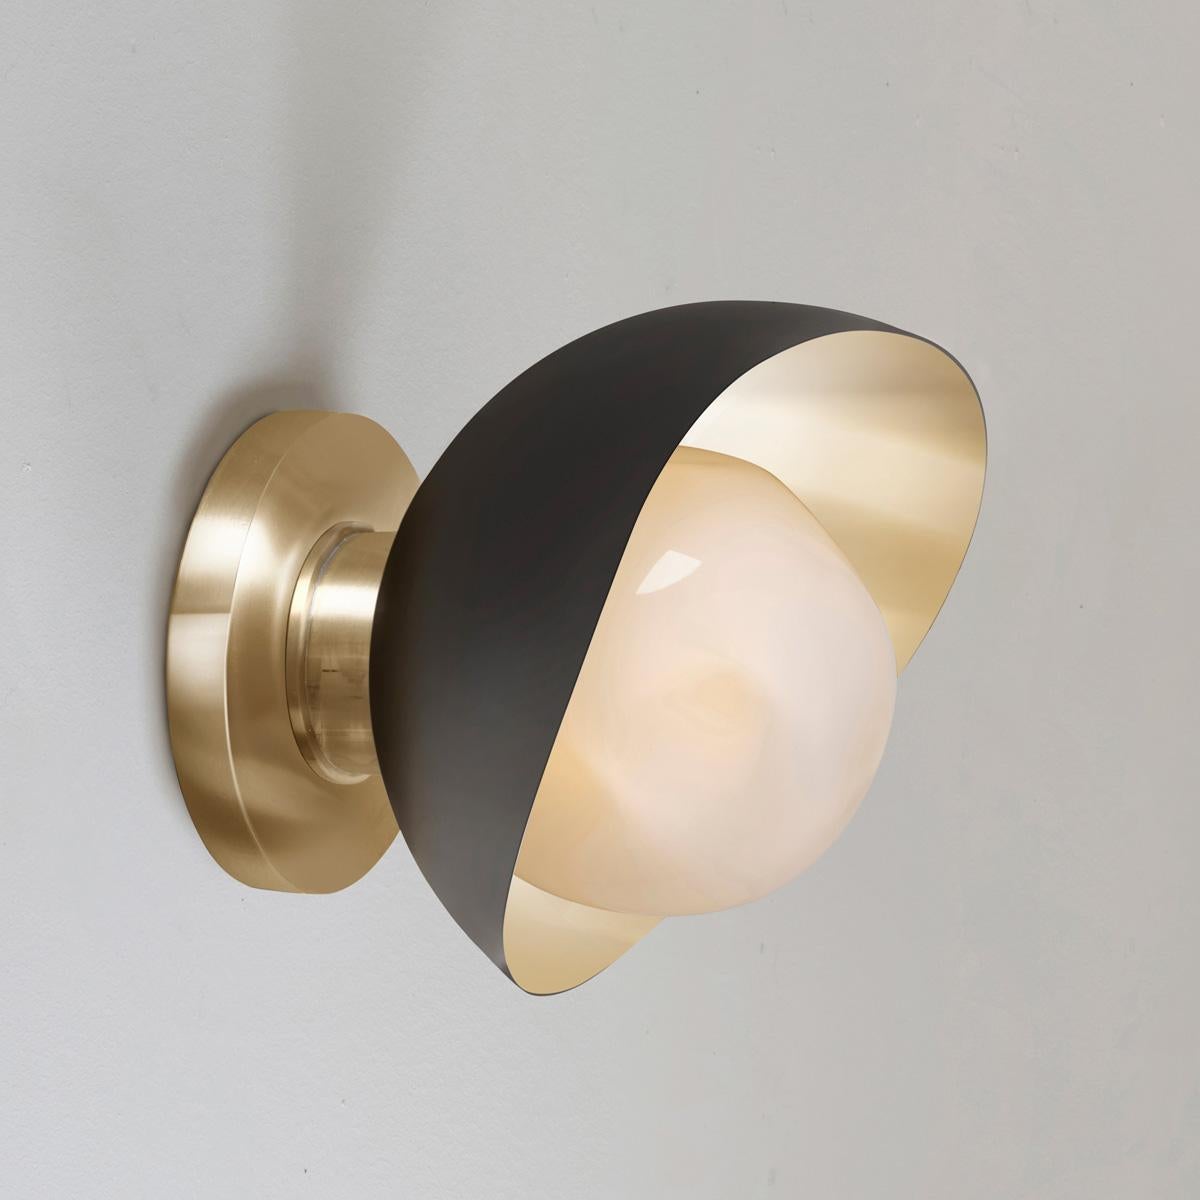 The Perla Mini wall light is the smallest member of the Perla collection featuring an organic brass shell nestling our Sfera glass handblown in Murano. See the Perla and Perla Grande for larger models.

The primary images show it in black and